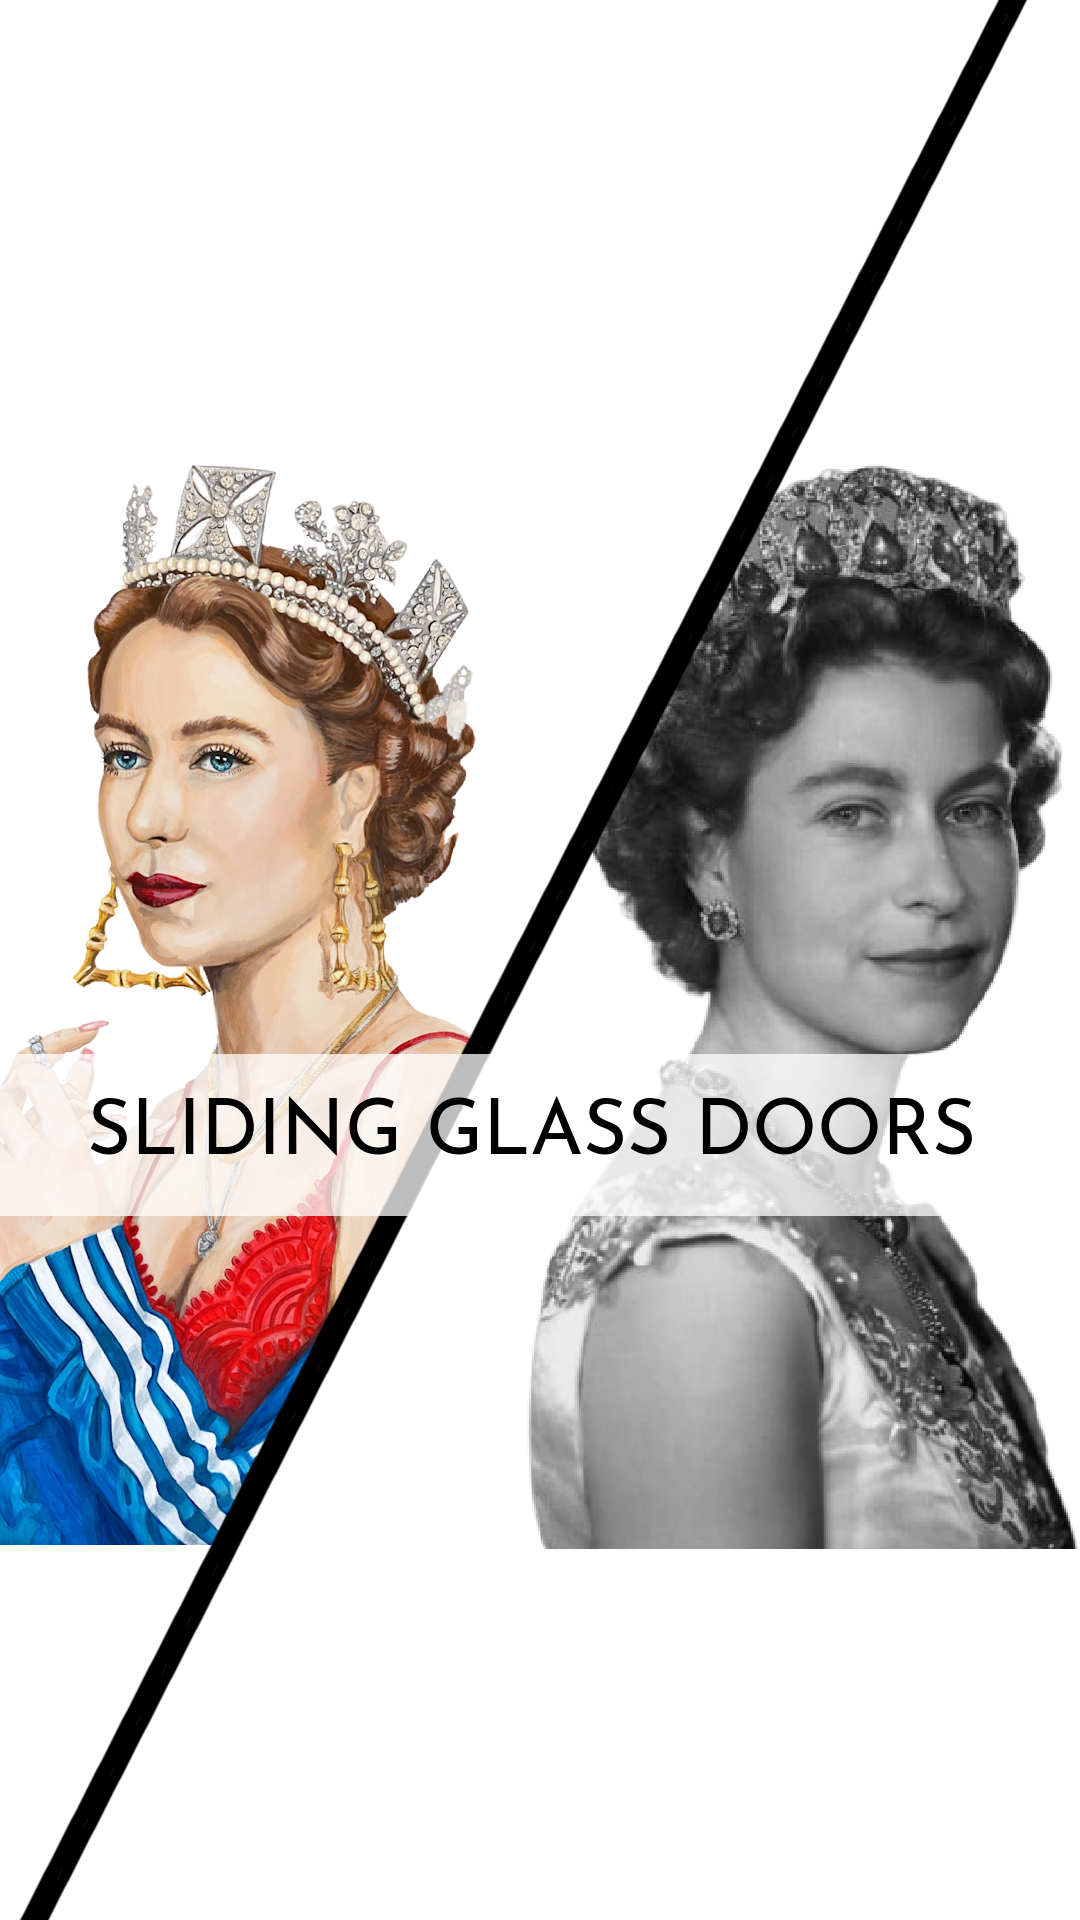 What is the Sliding Glass Door Theory?